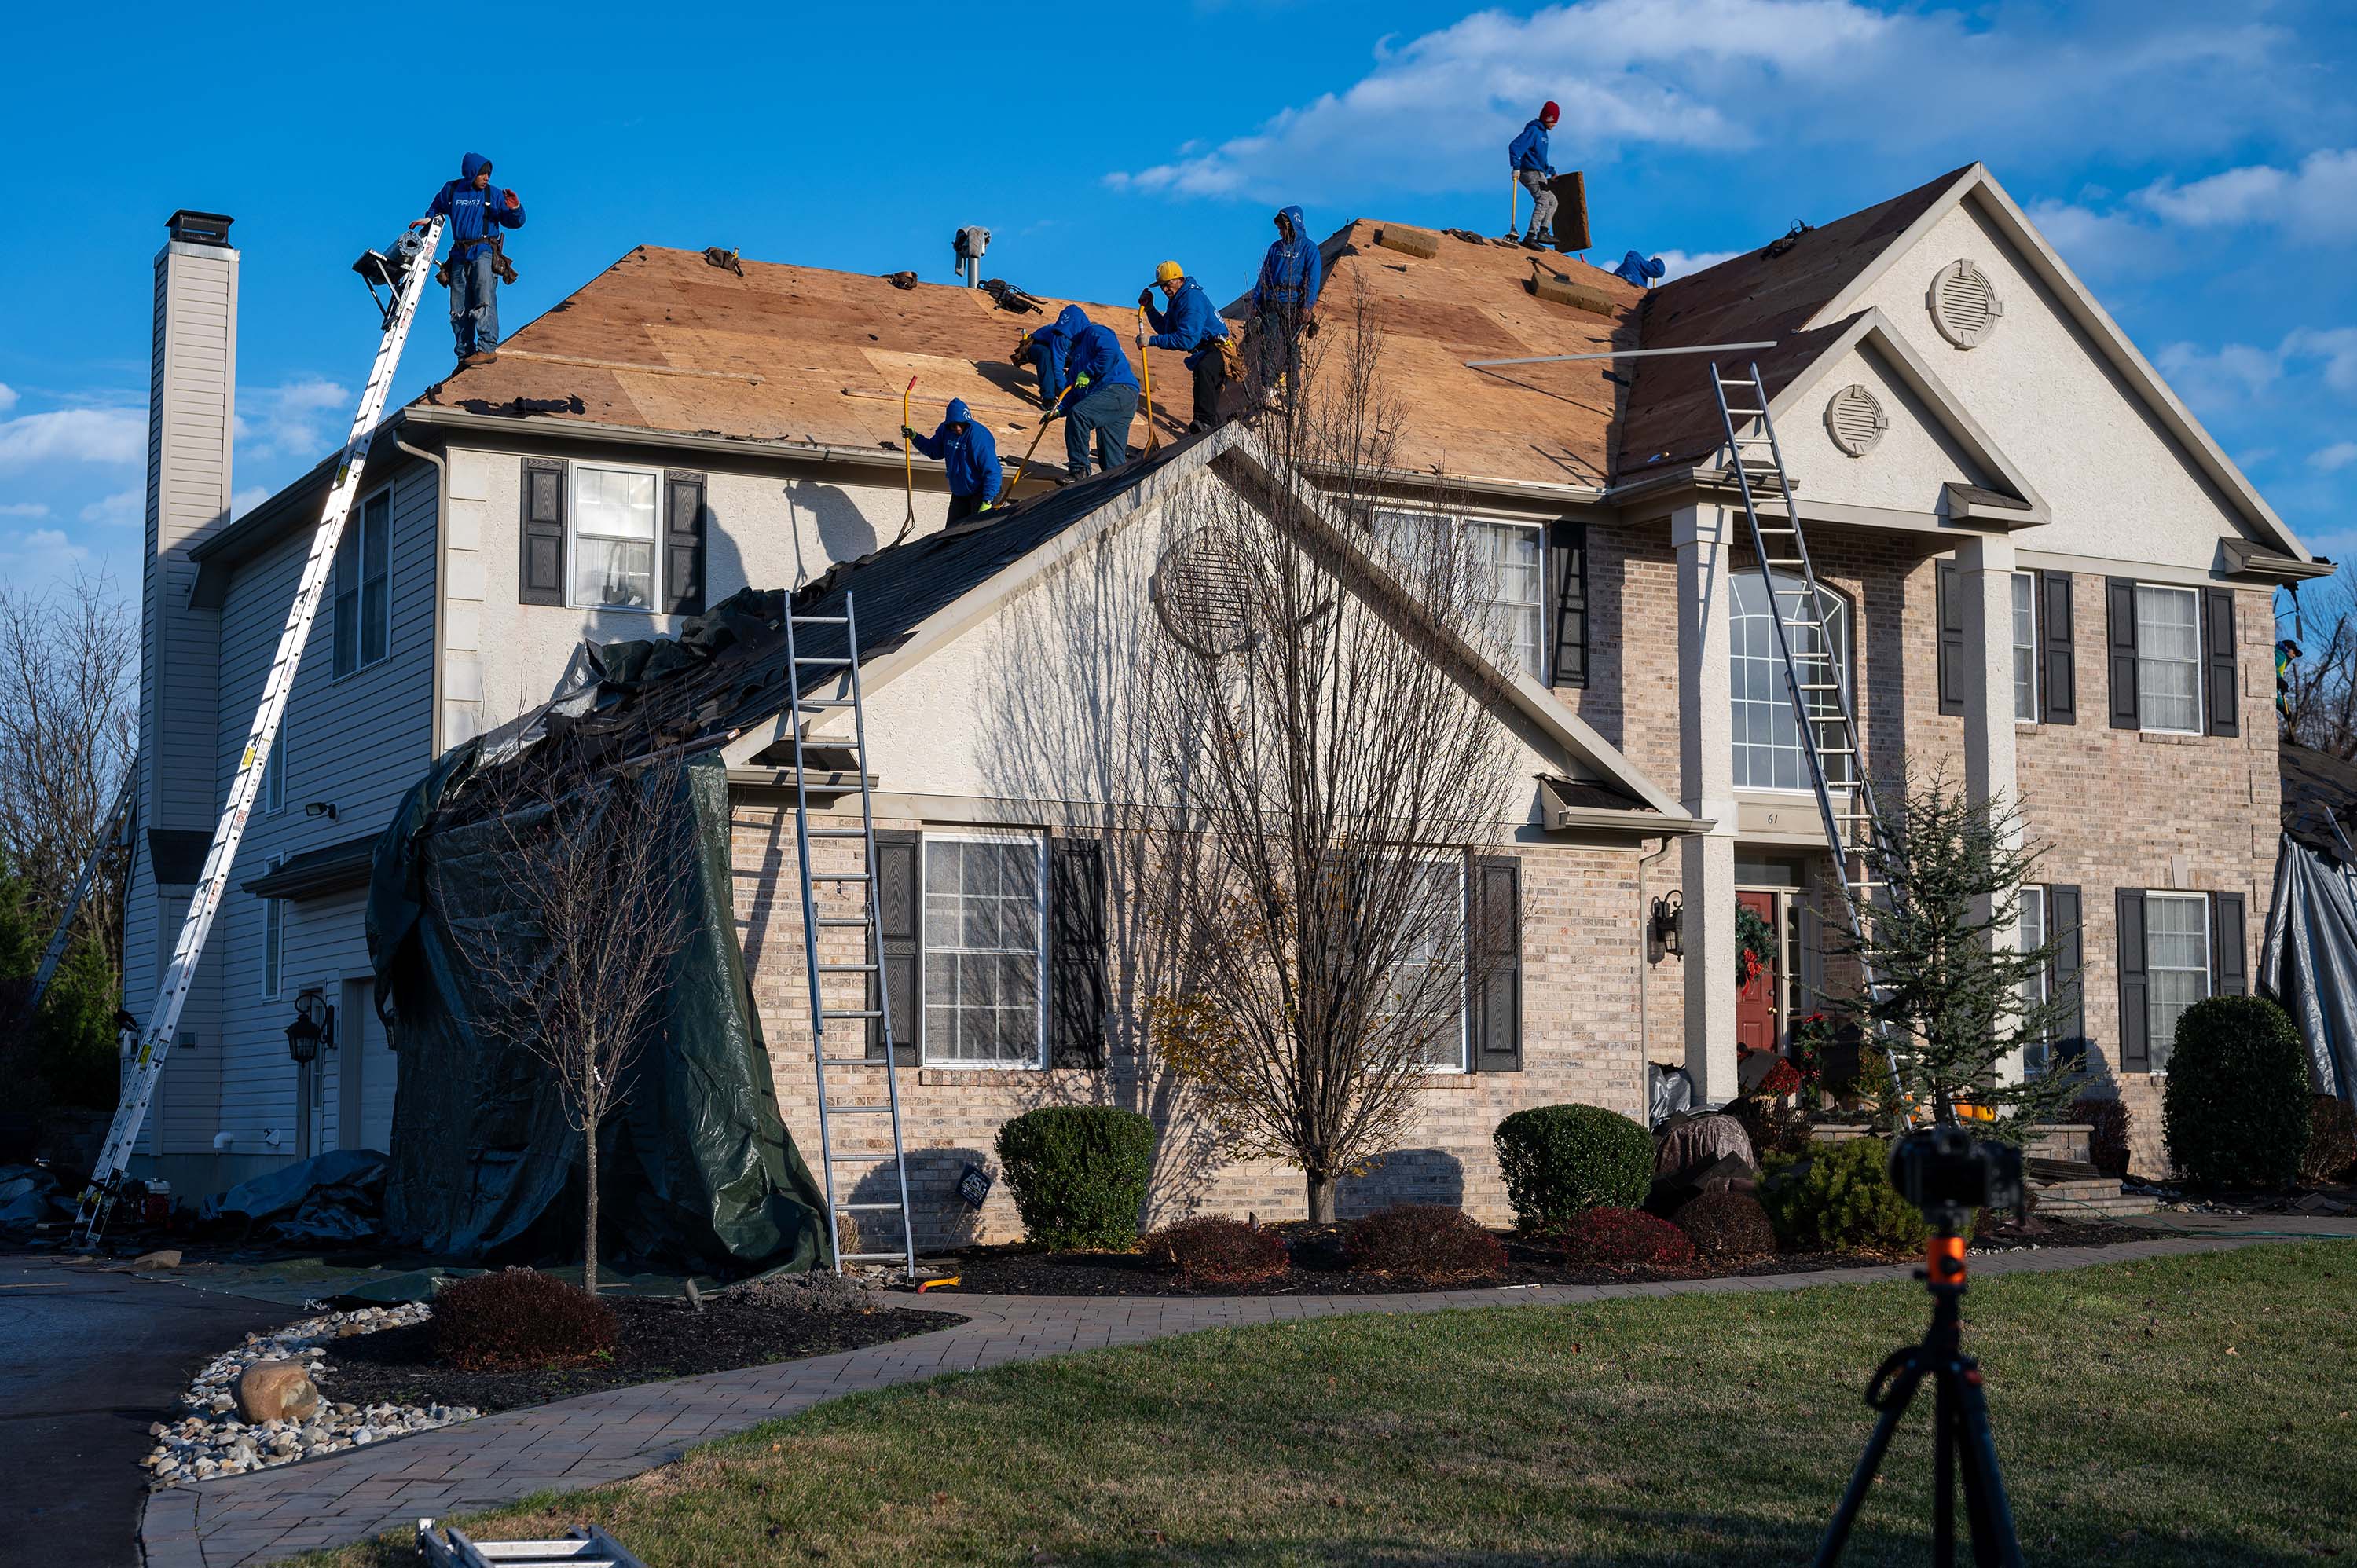 Roofing repair company - residential roofing contractors in Evesham (large image)